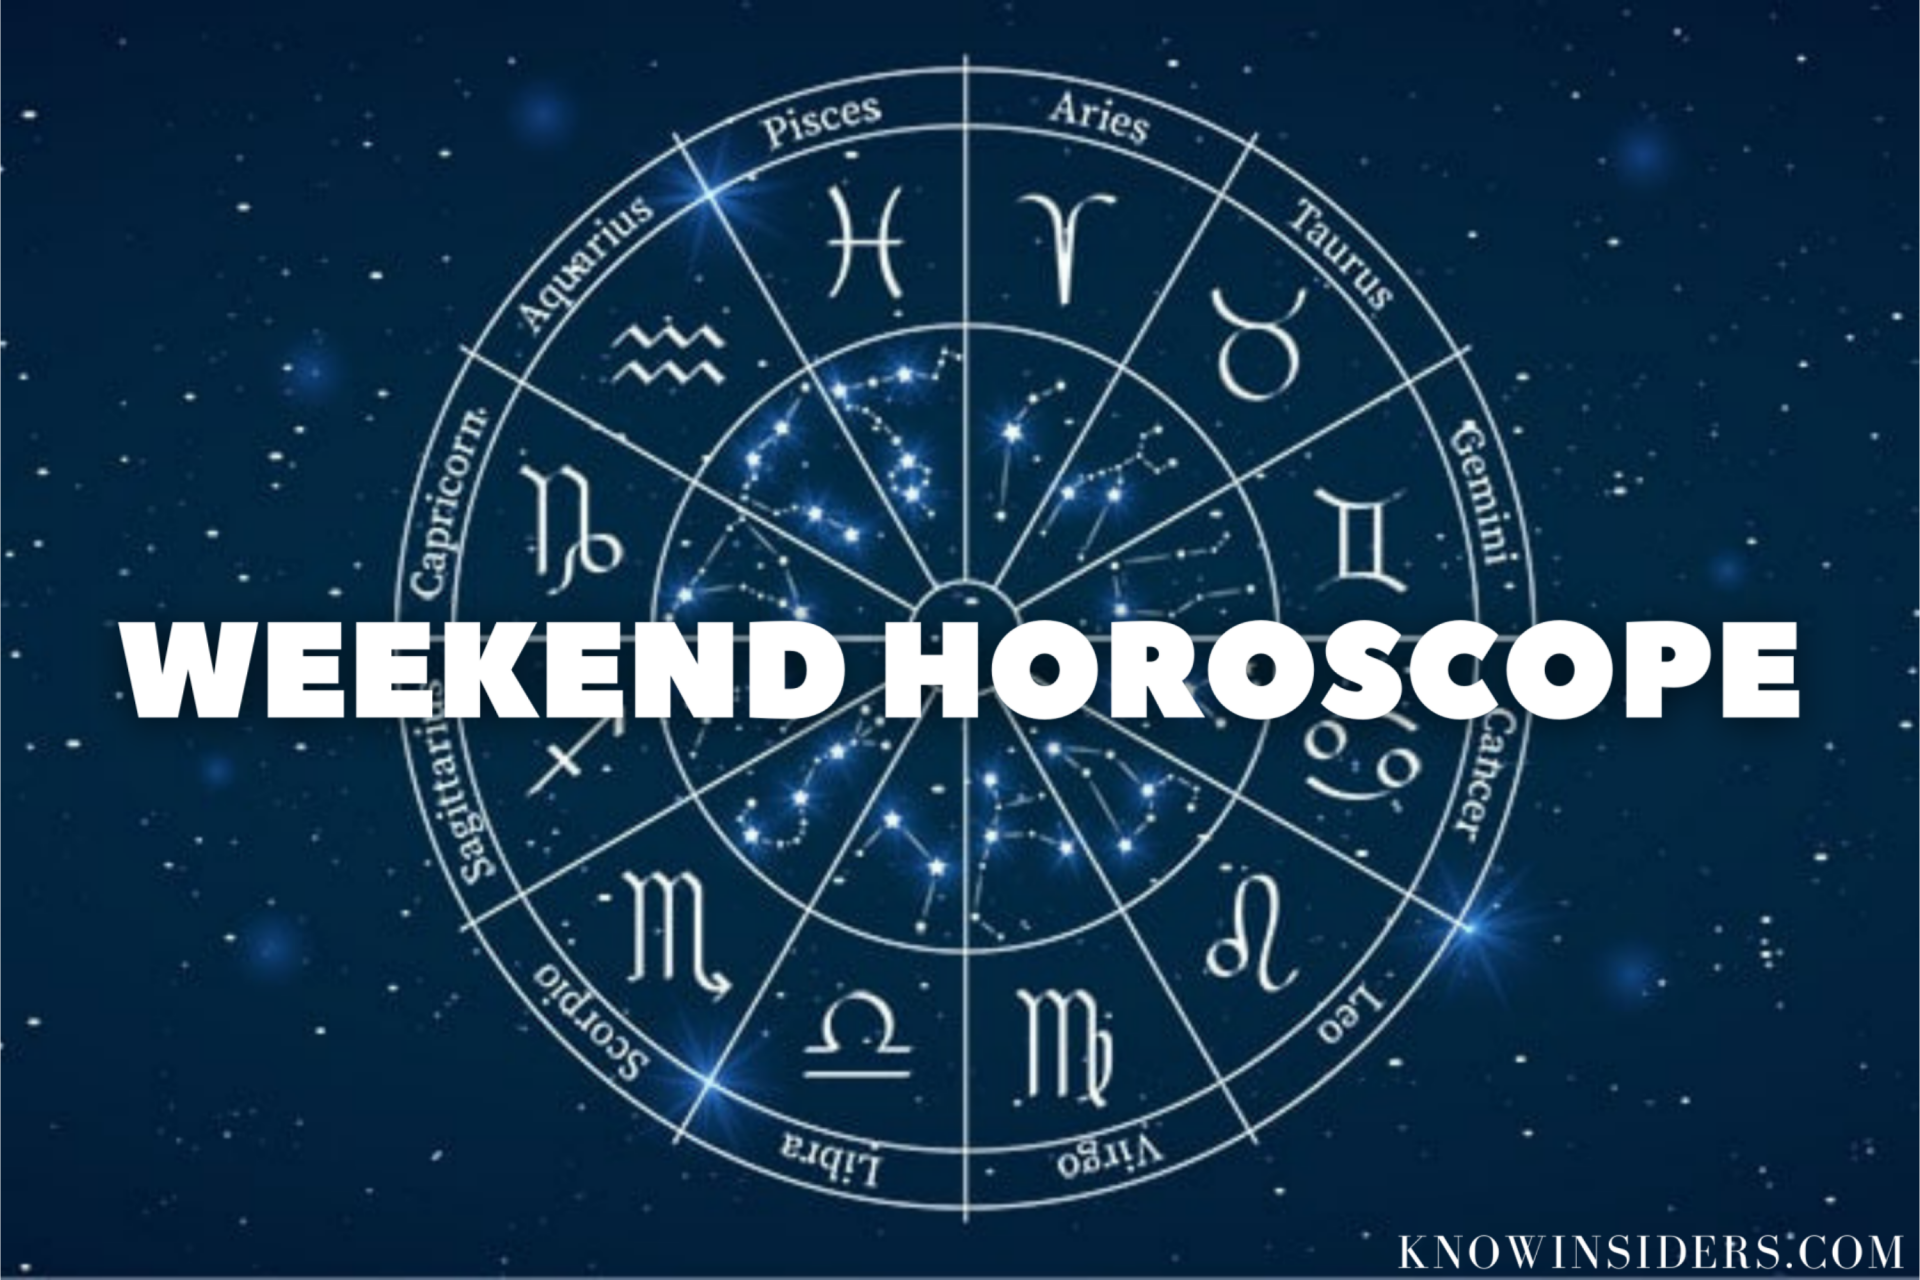 Weekend Horoscope (May 7 9) Predictions for All 12 Zodiac Signs